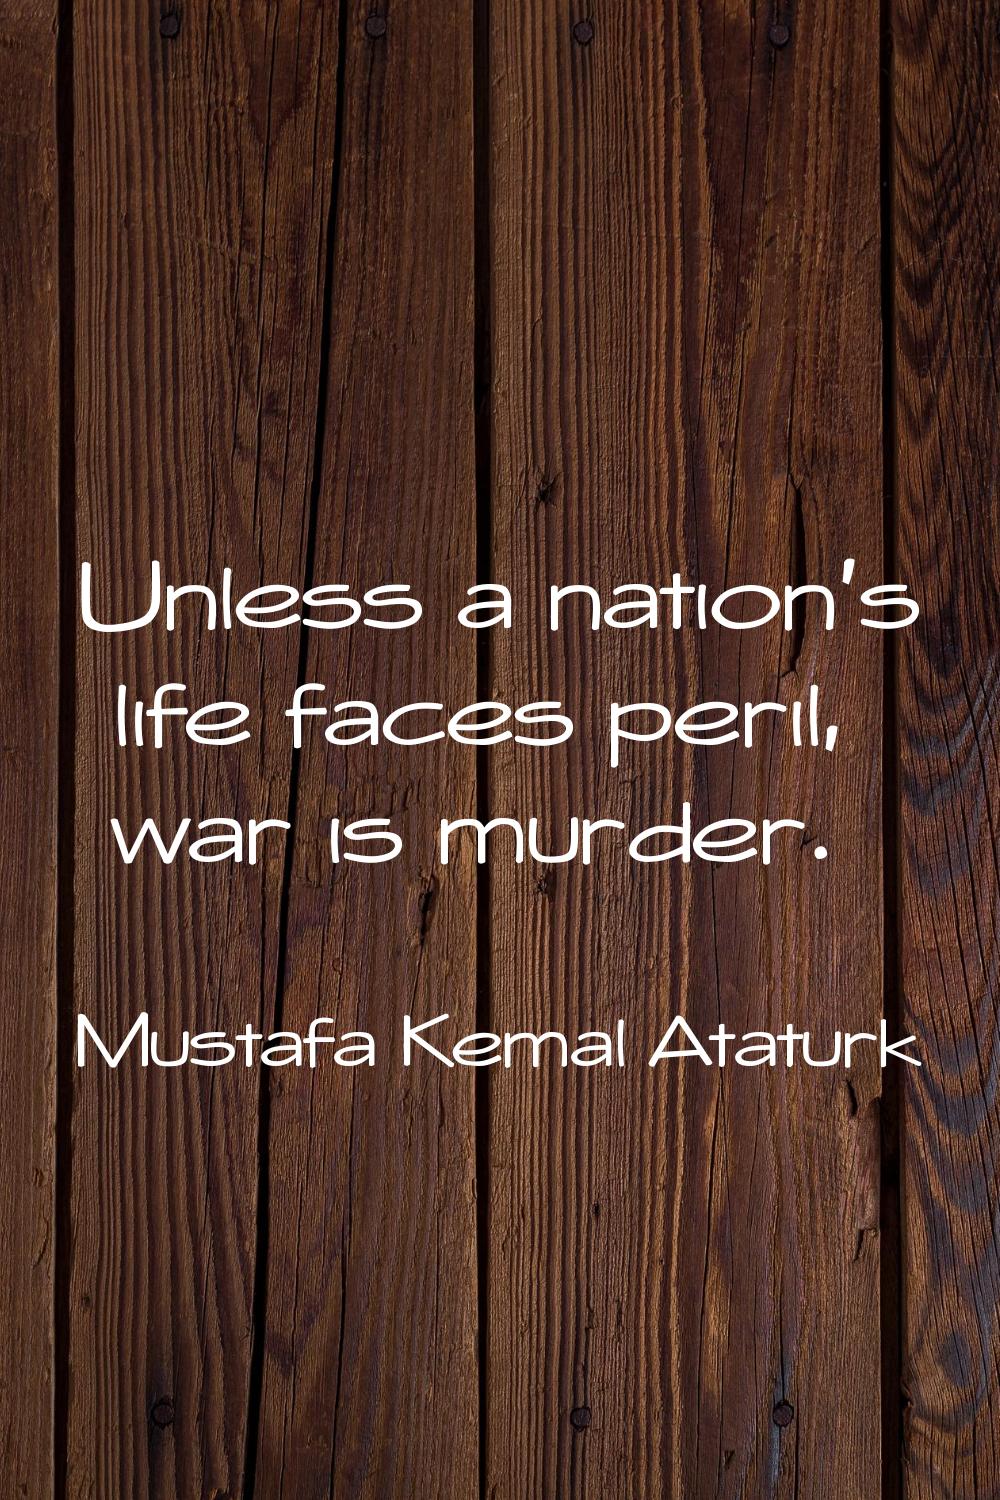 Unless a nation's life faces peril, war is murder.